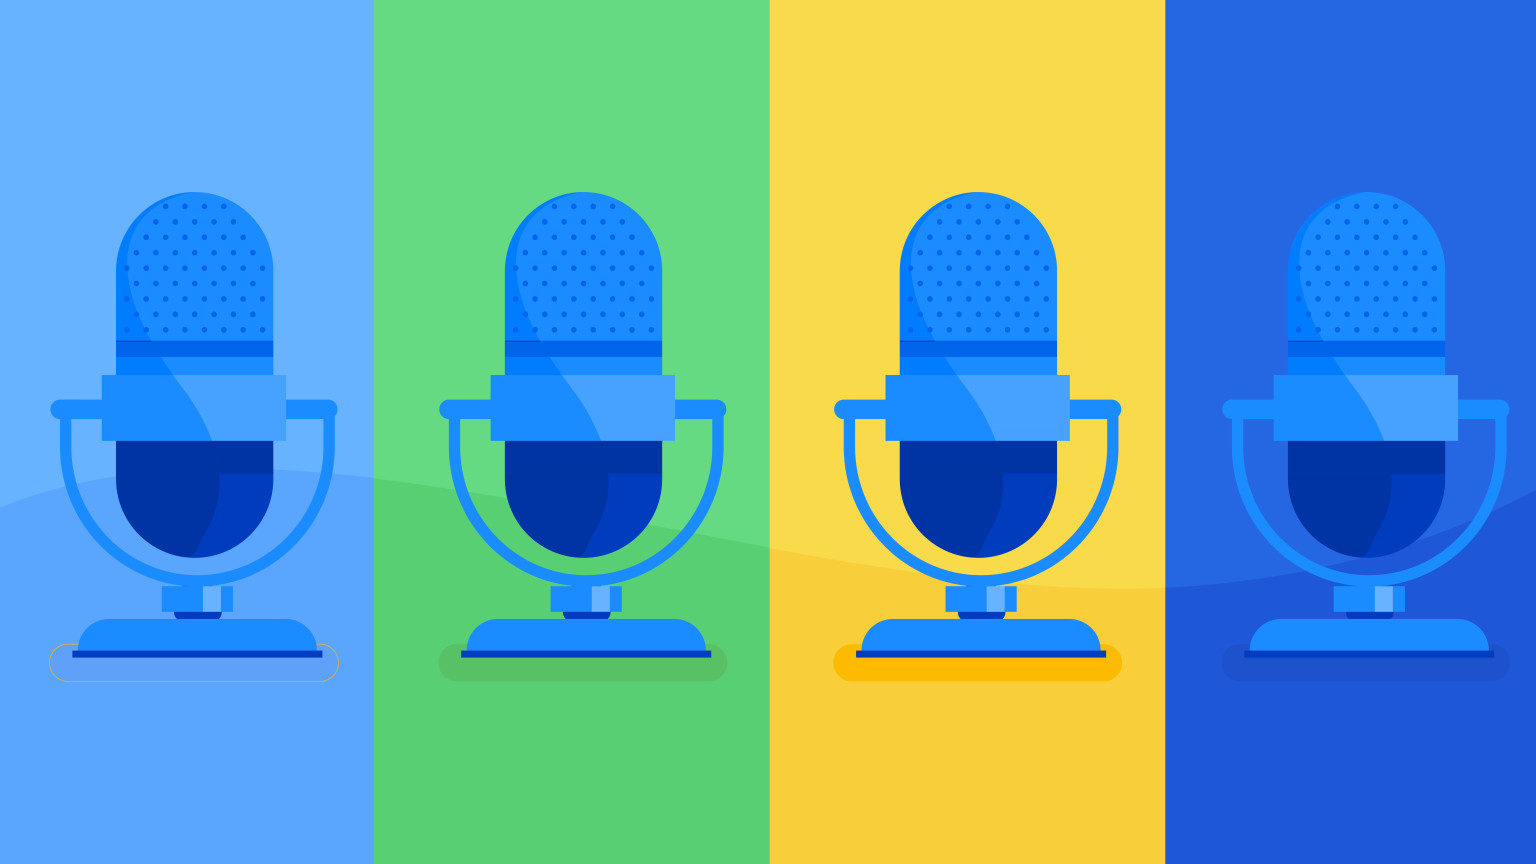 Illustrated graphic of four microphones against a colored backgrounds